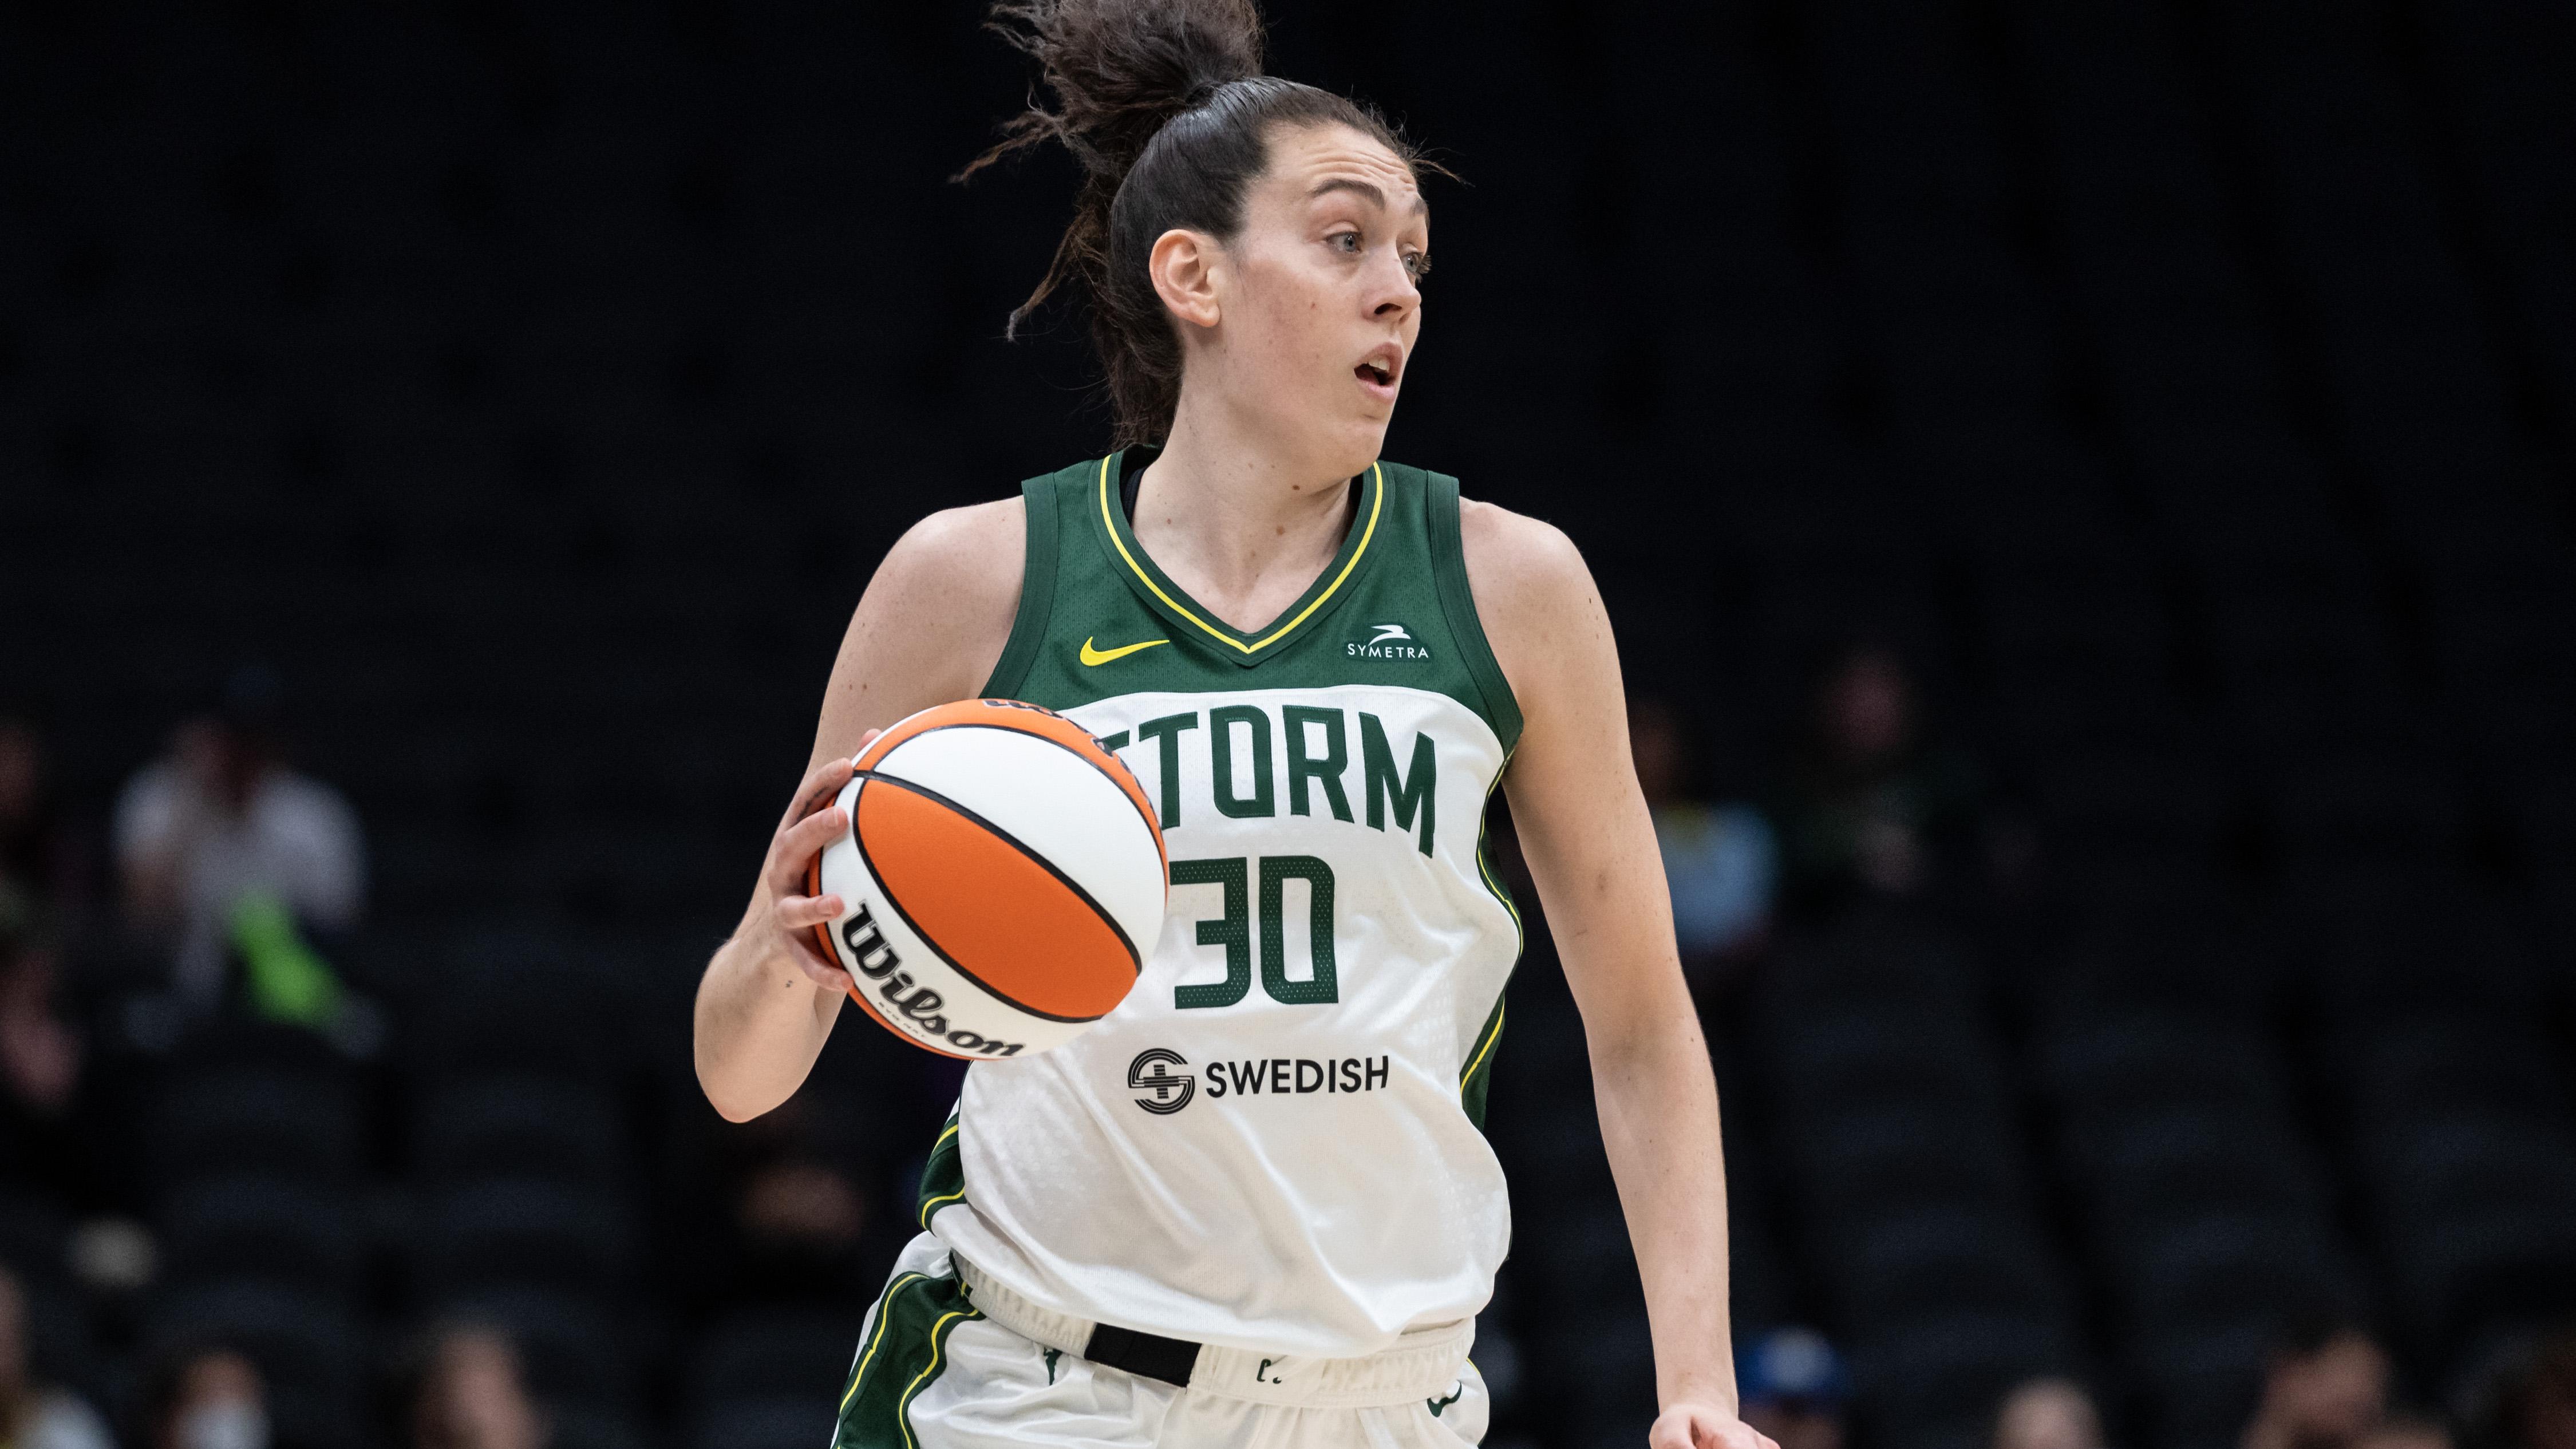 Storm vs Sun Prediction, Odds & Betting Insights for WNBA Game on FanDuel Sportsbook